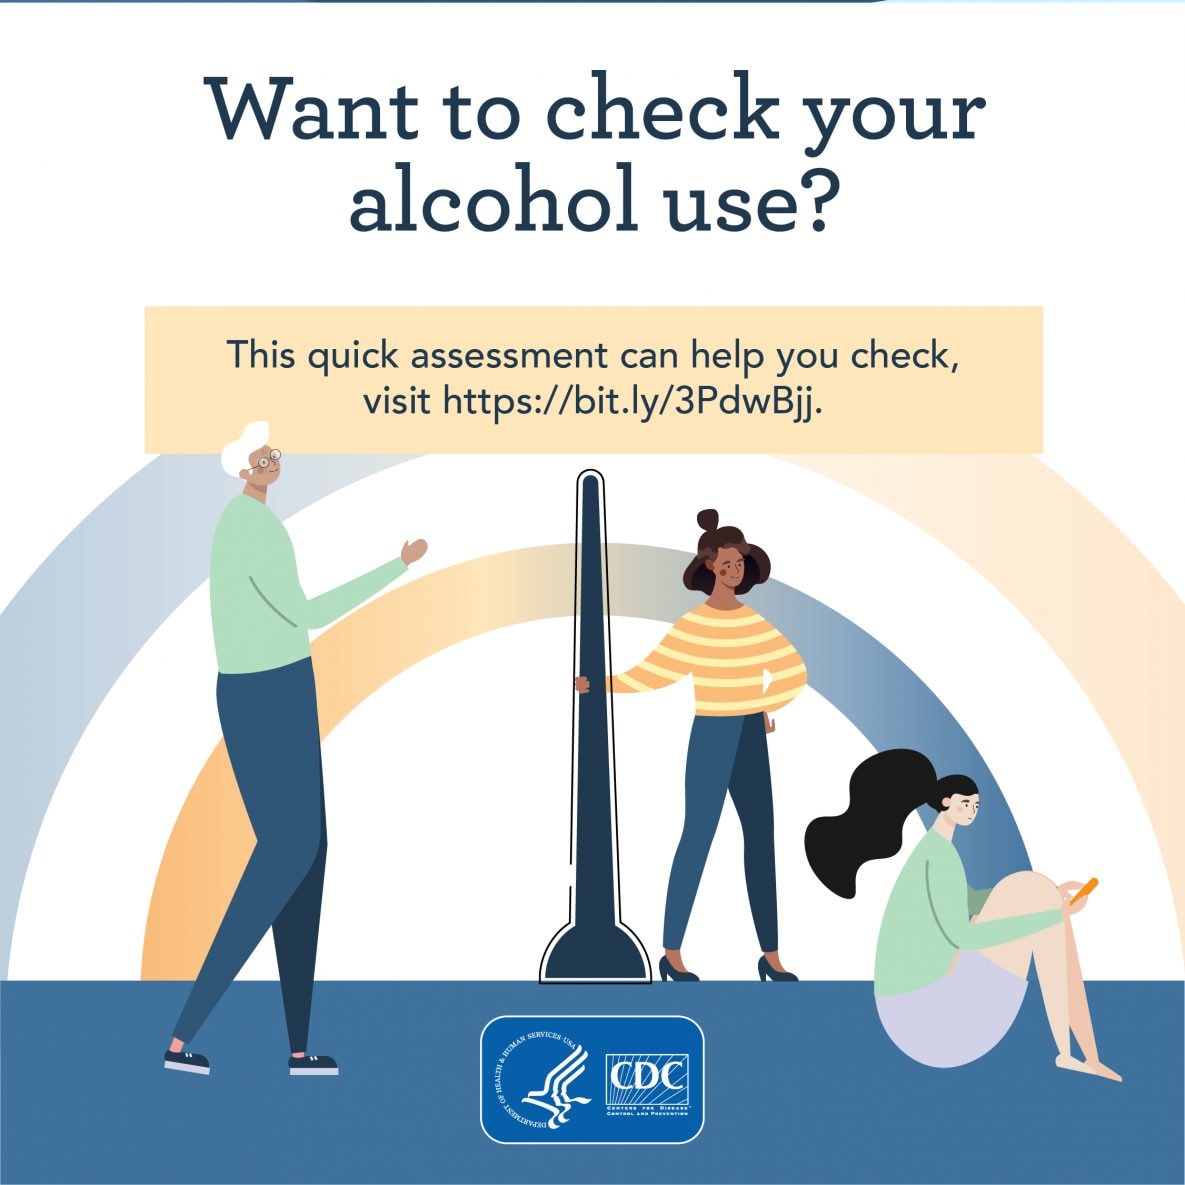 Want to check your alcohol use? This quick assessment can help you check, visit https://bit.ly/3PdwBjj.